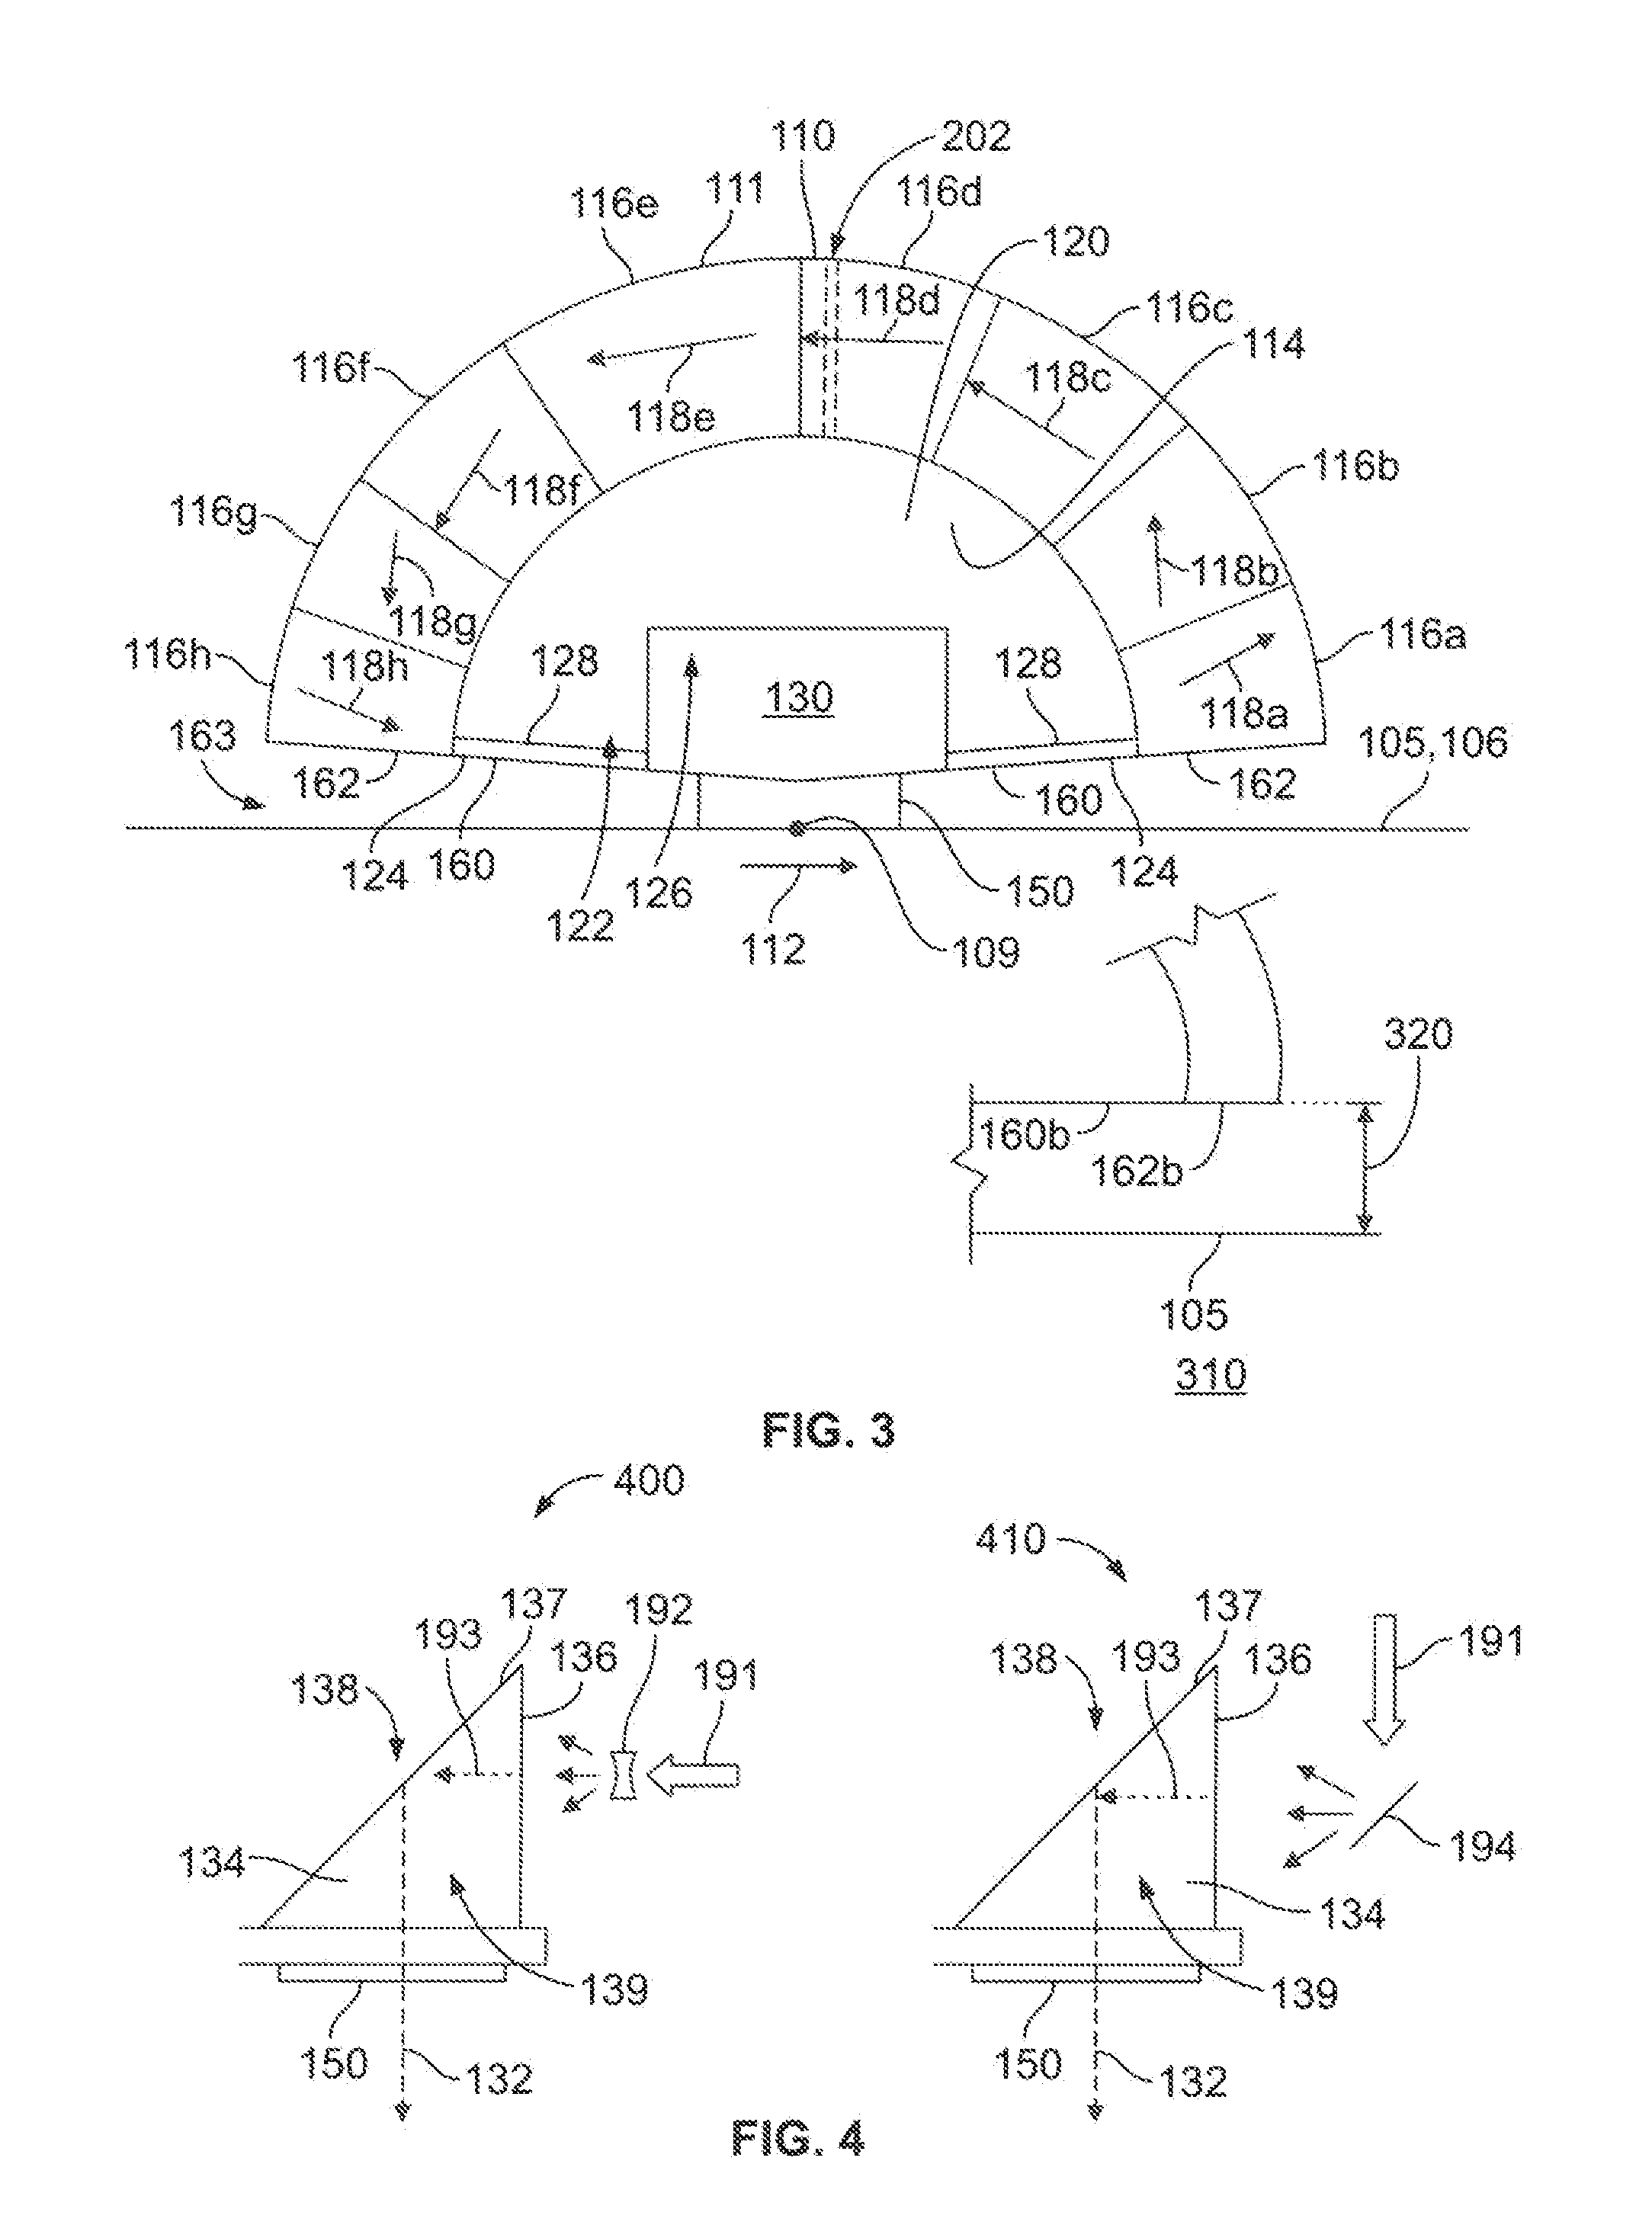 Systems and methods for testing internal bonds